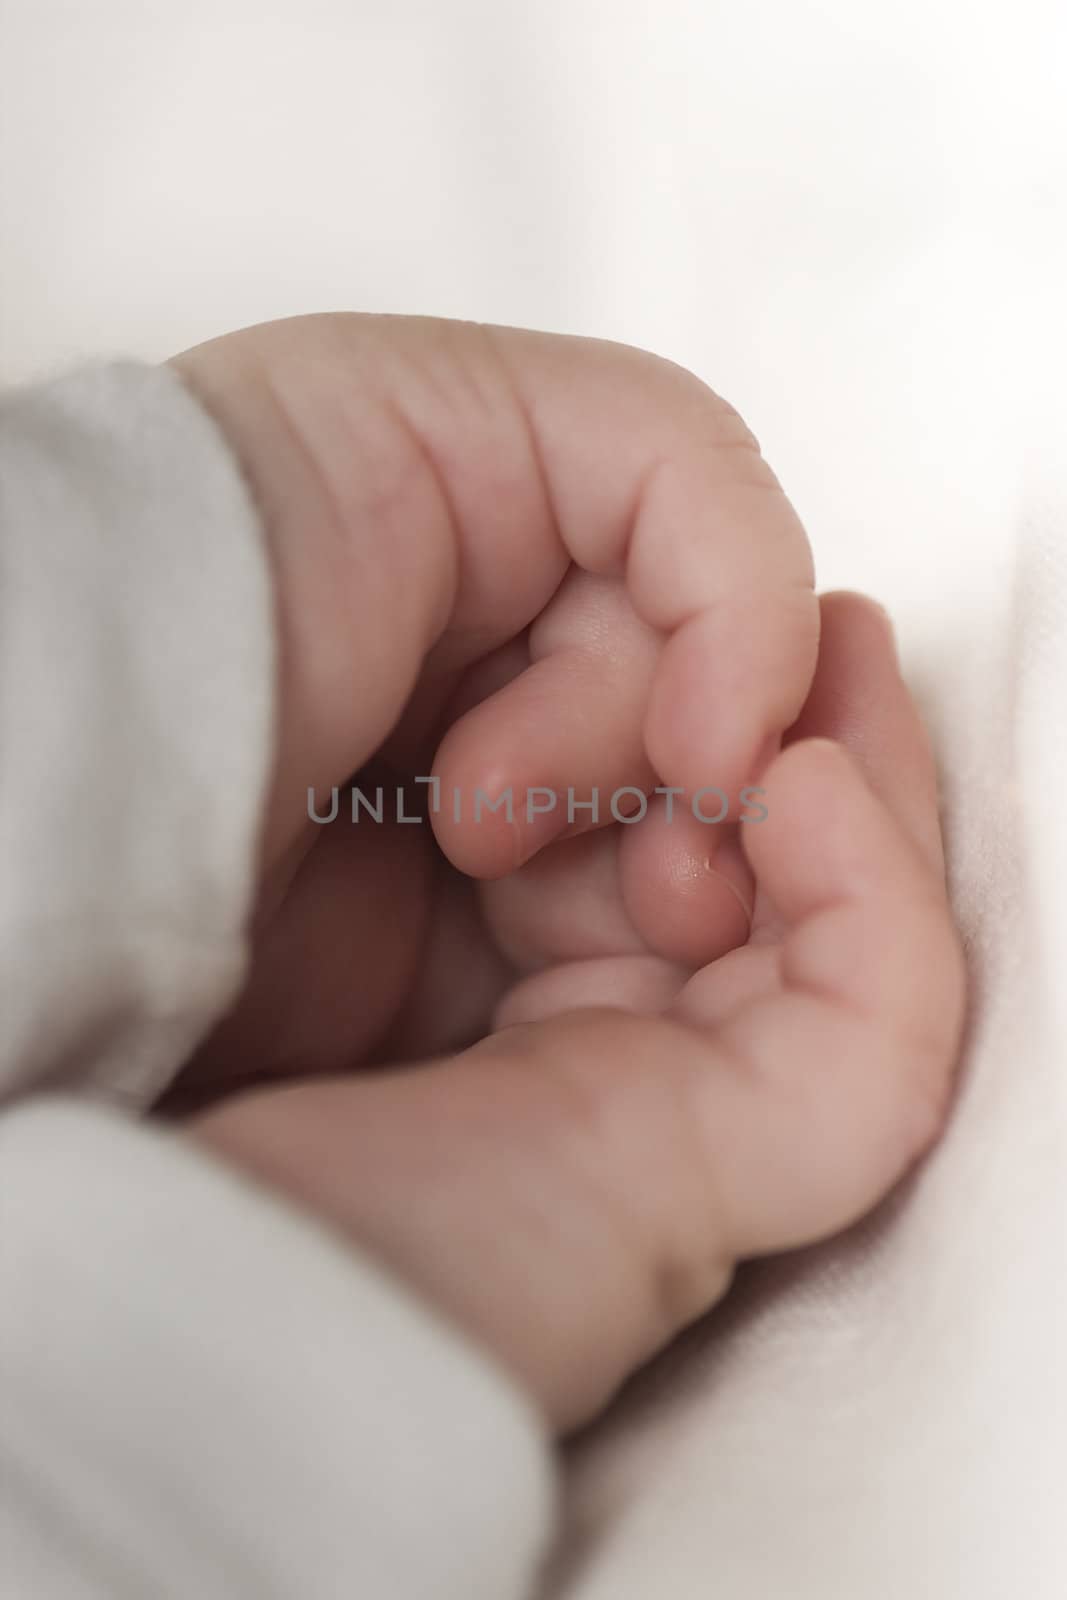 small hands of the sleeping baby by Serp